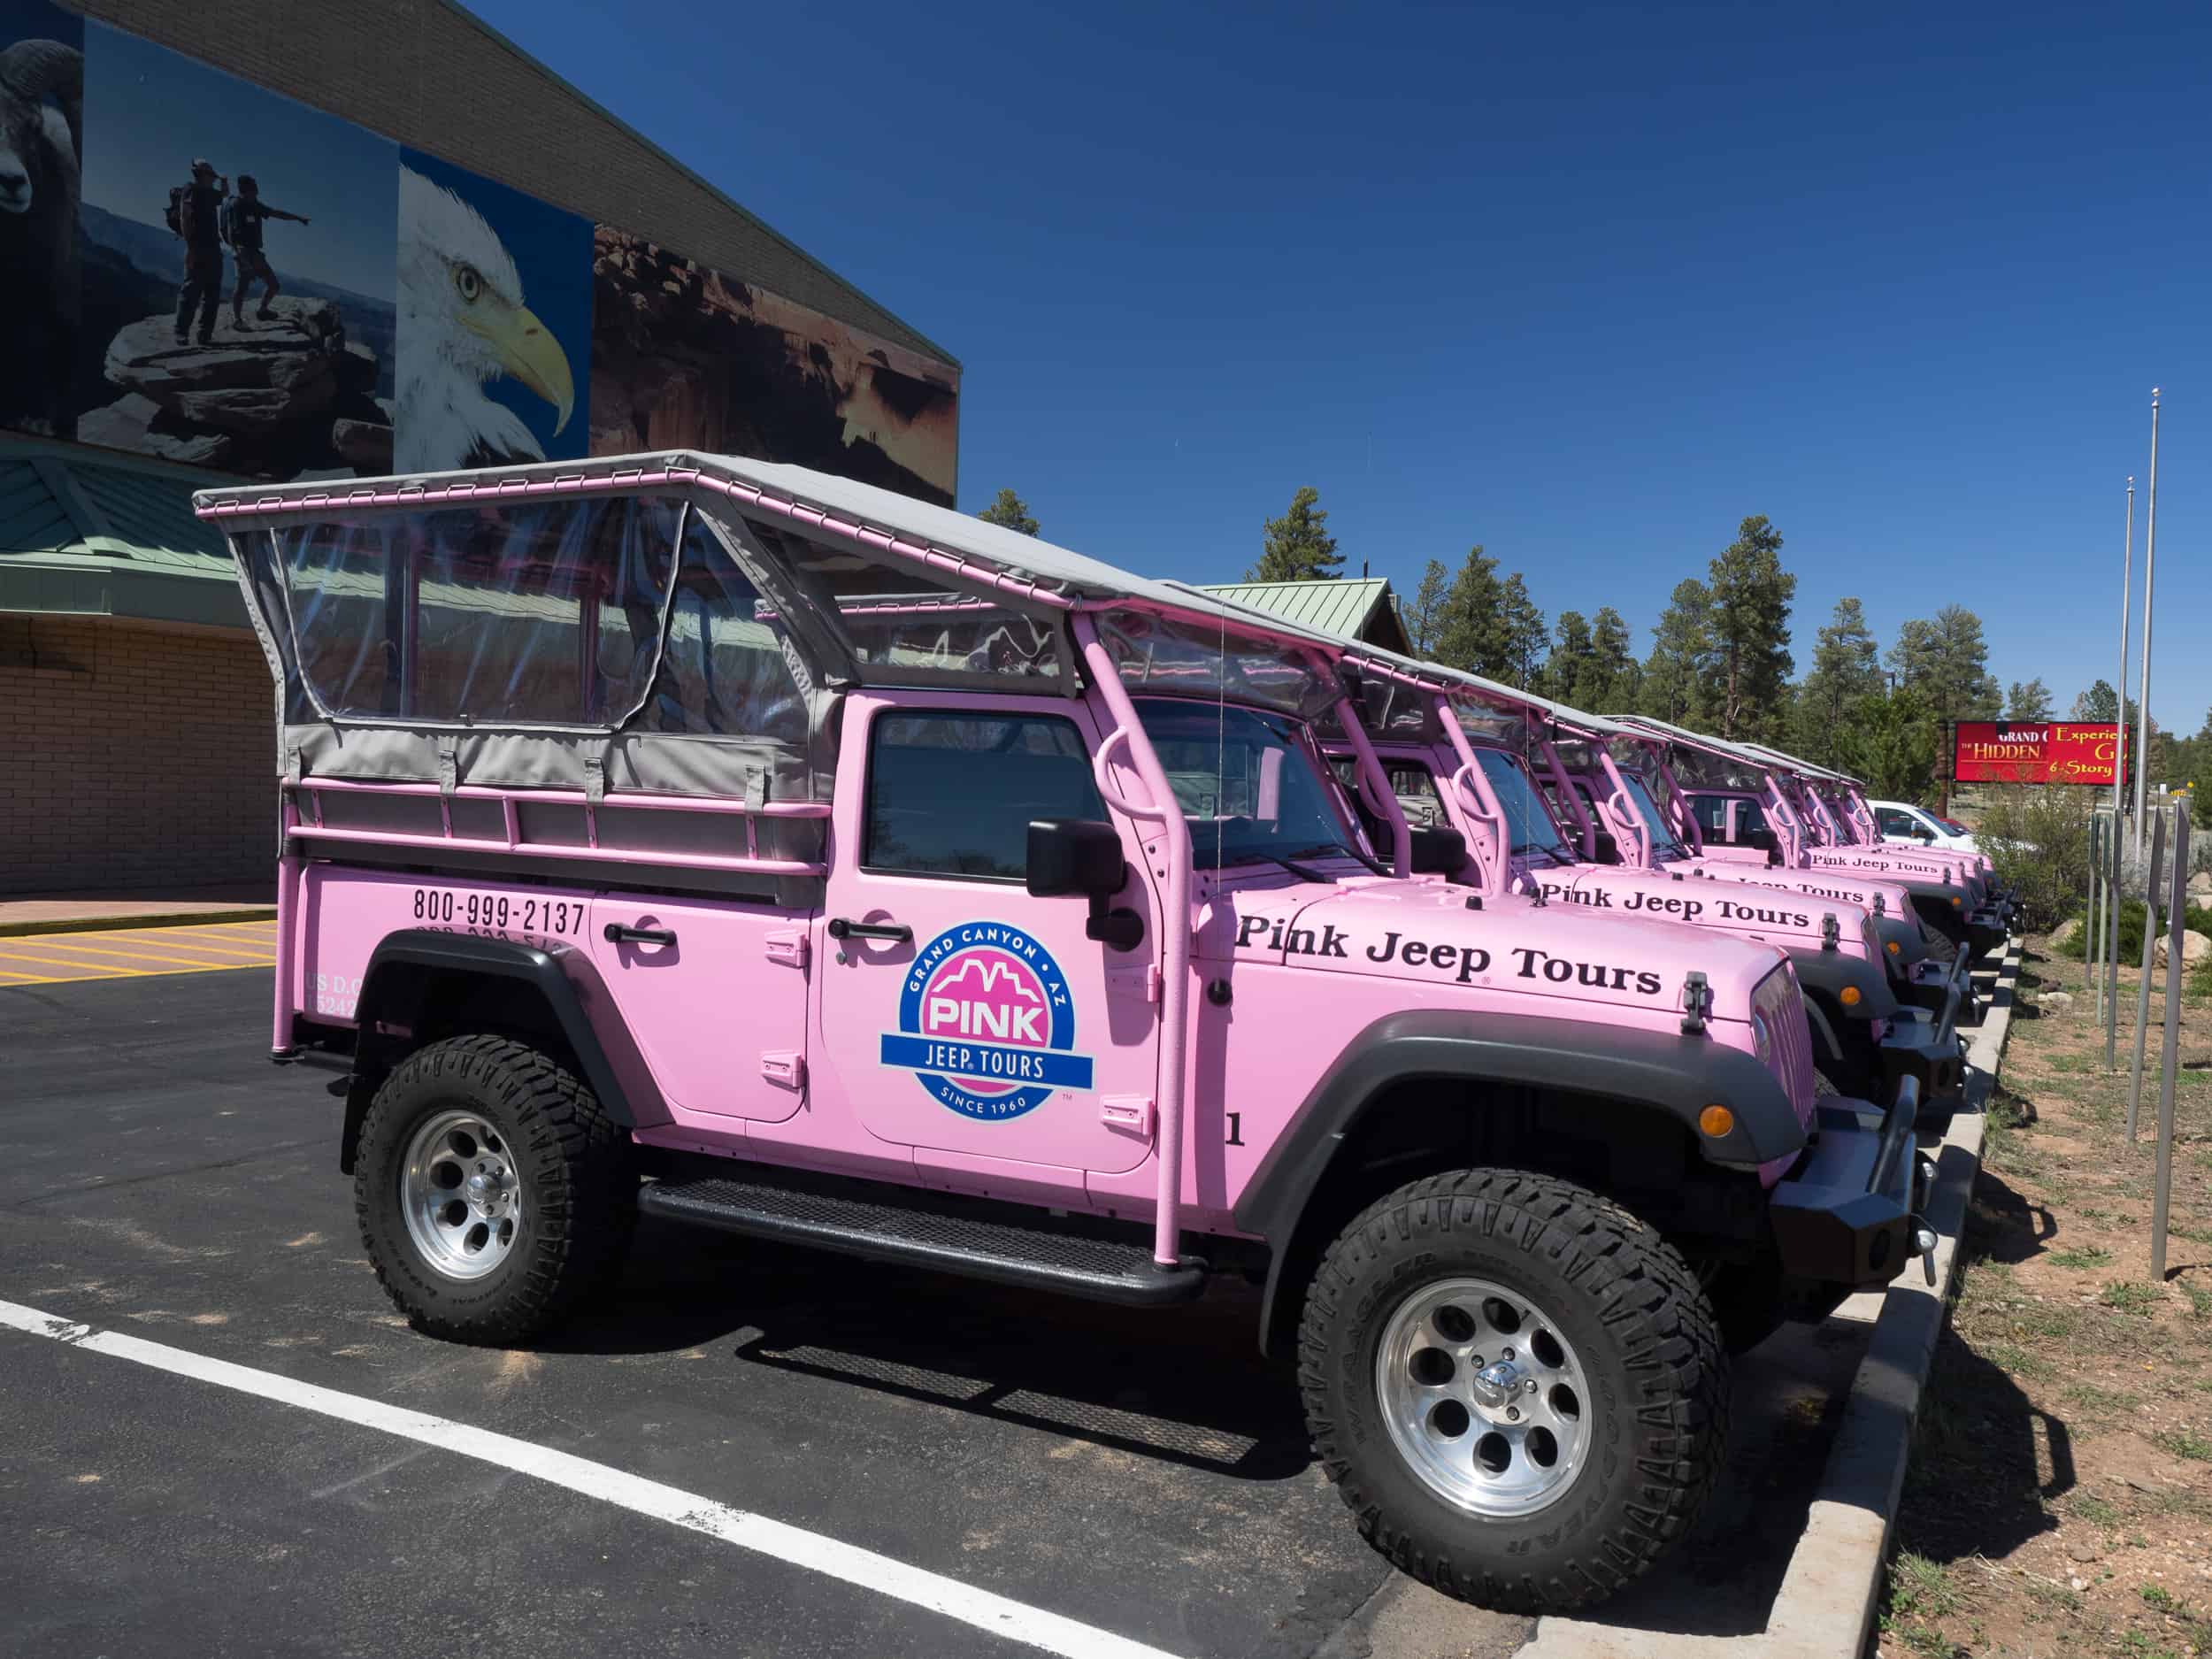 Pink Jeep at the Imax